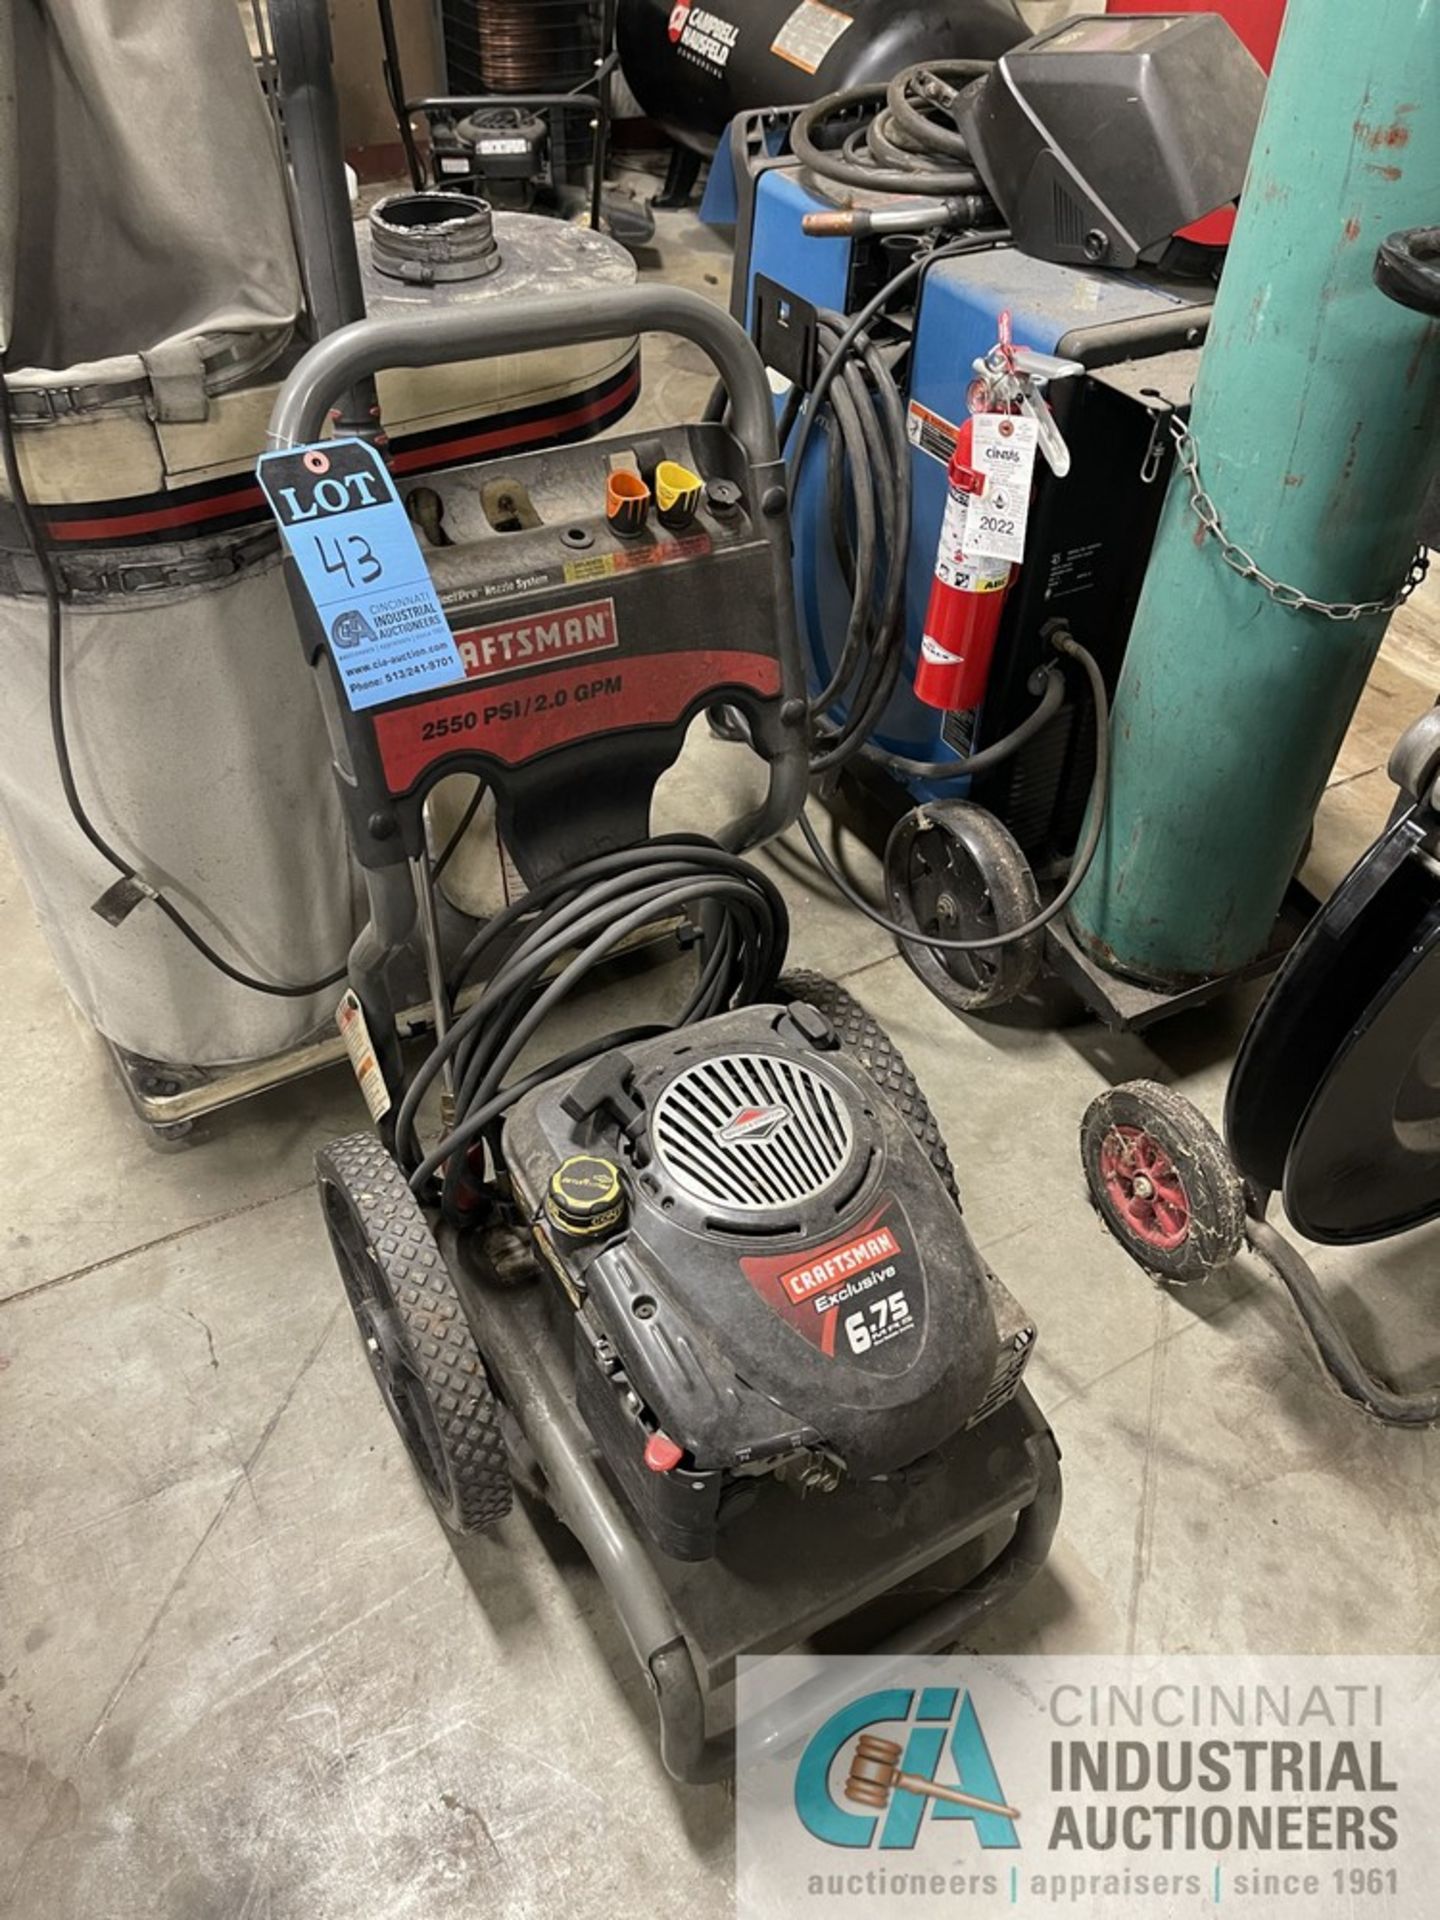 2,550 PSI GAS POWERED CRAFTSMAN PRESSURE WASHER - Image 3 of 3